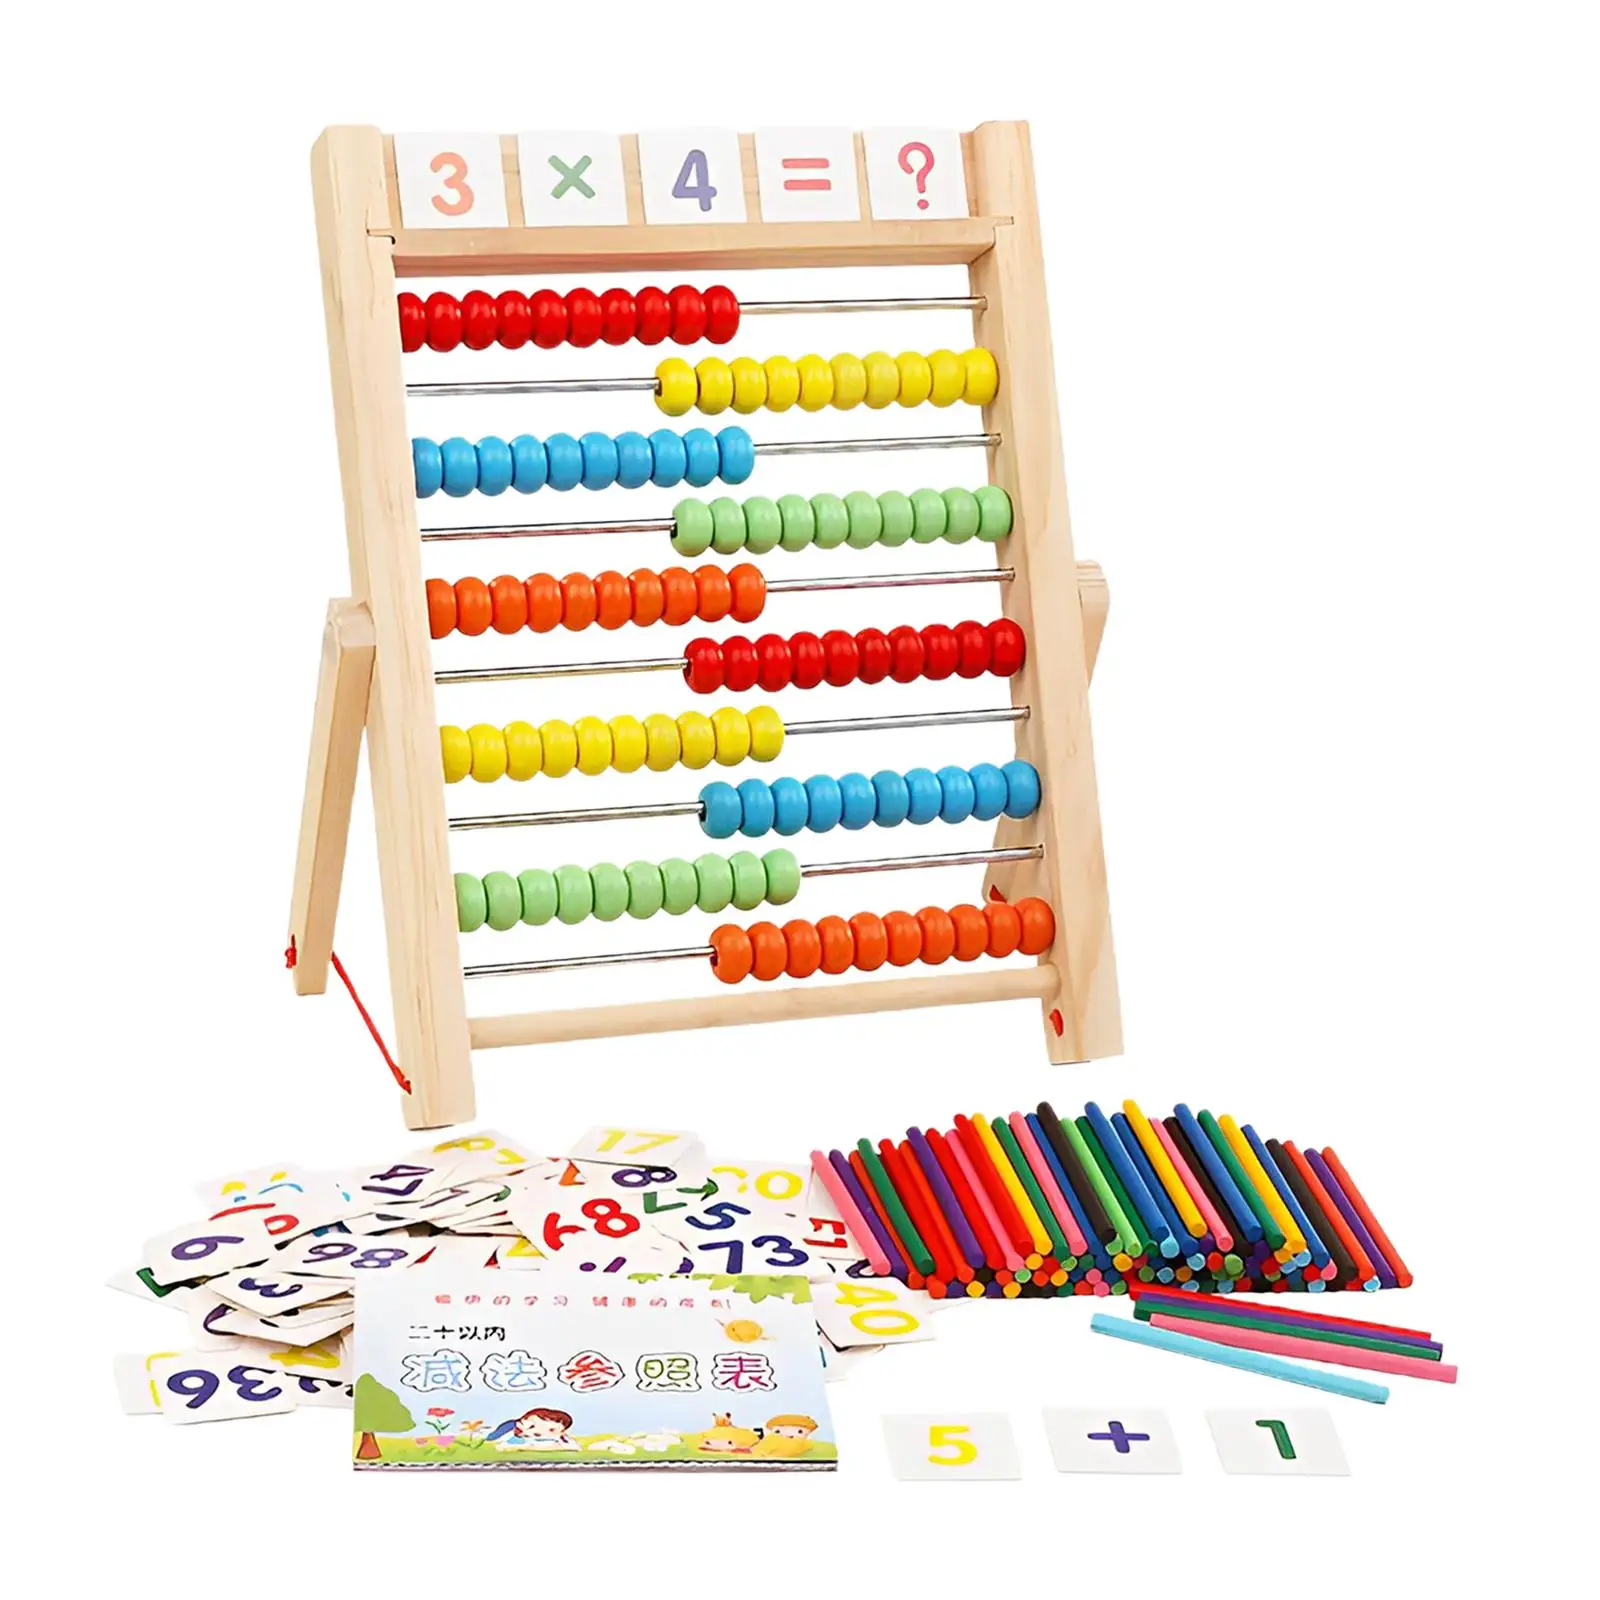 Colorful Wooden Abacus Number Learning Educational Counting Frames Toy Math Manipulatives for Toddlers Preschool Kids Boys Girls